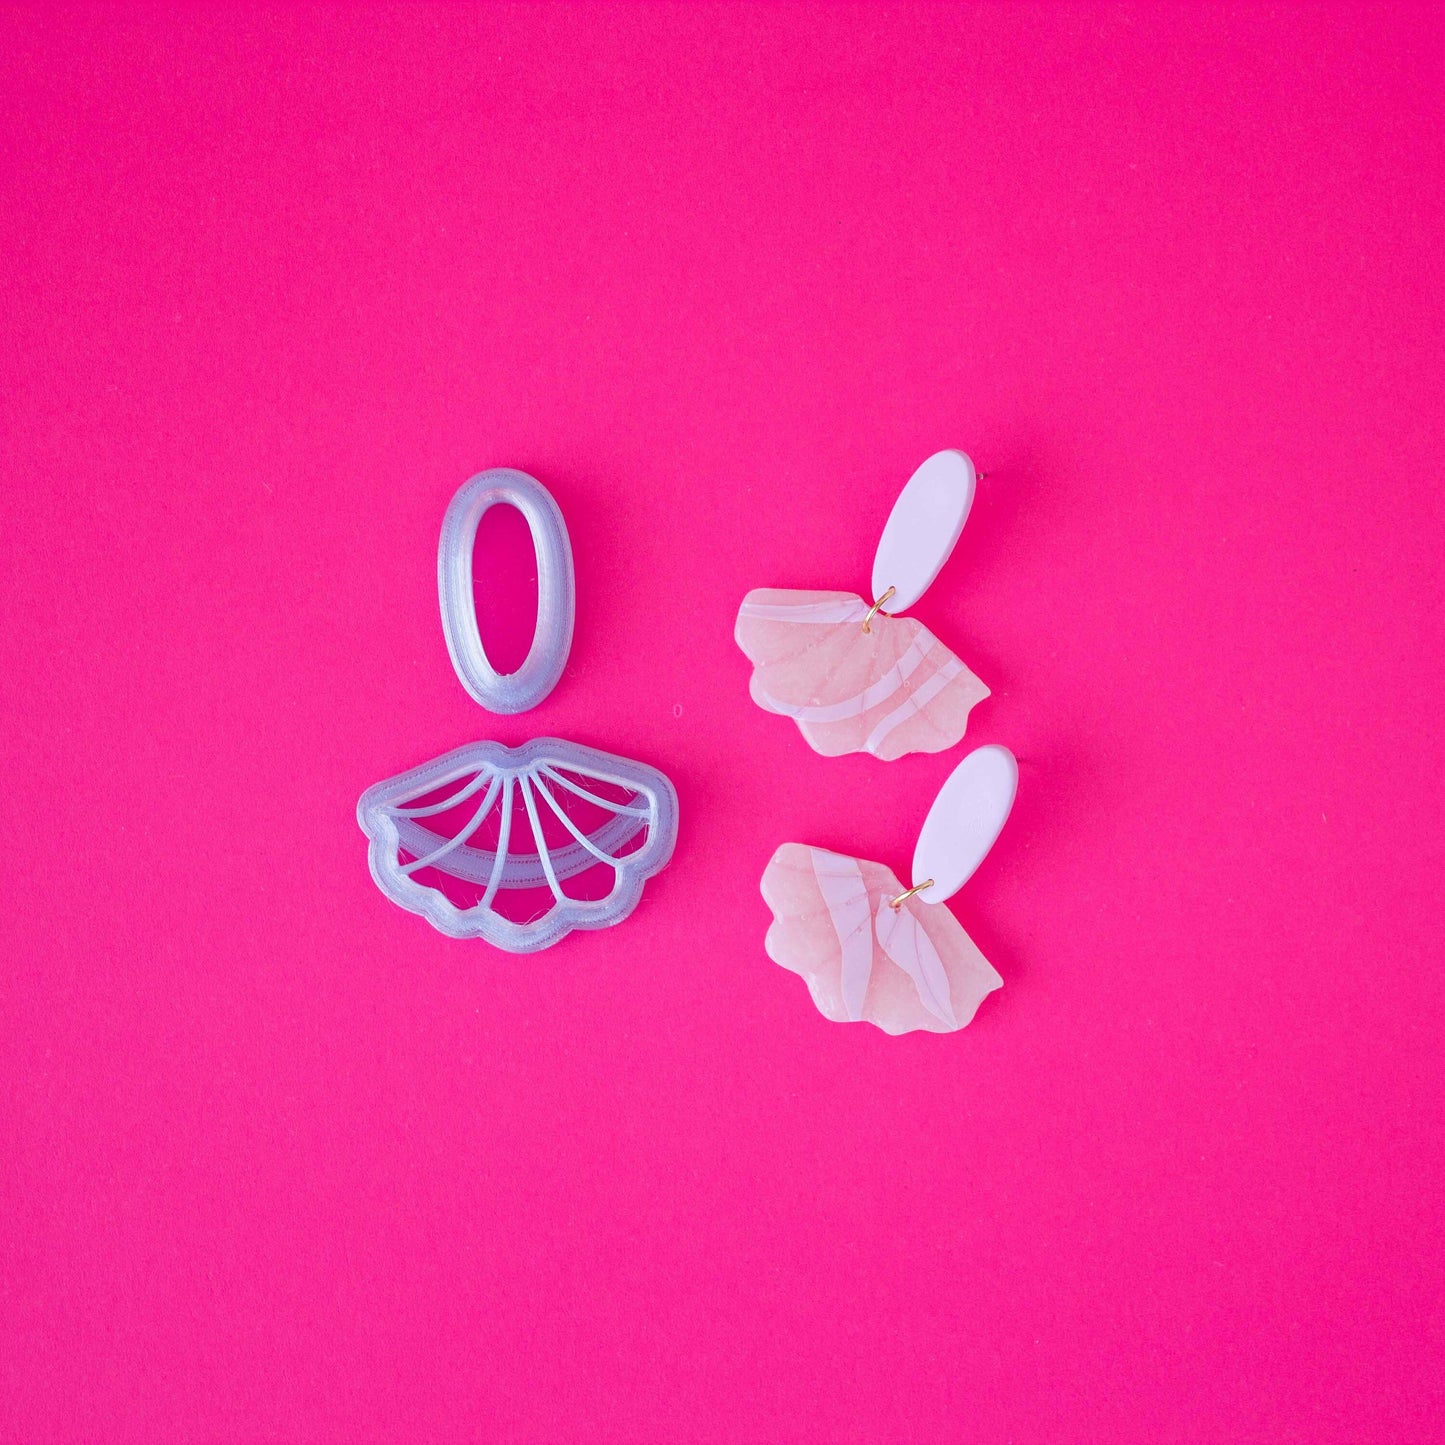 A set of small cutters on a pink background.